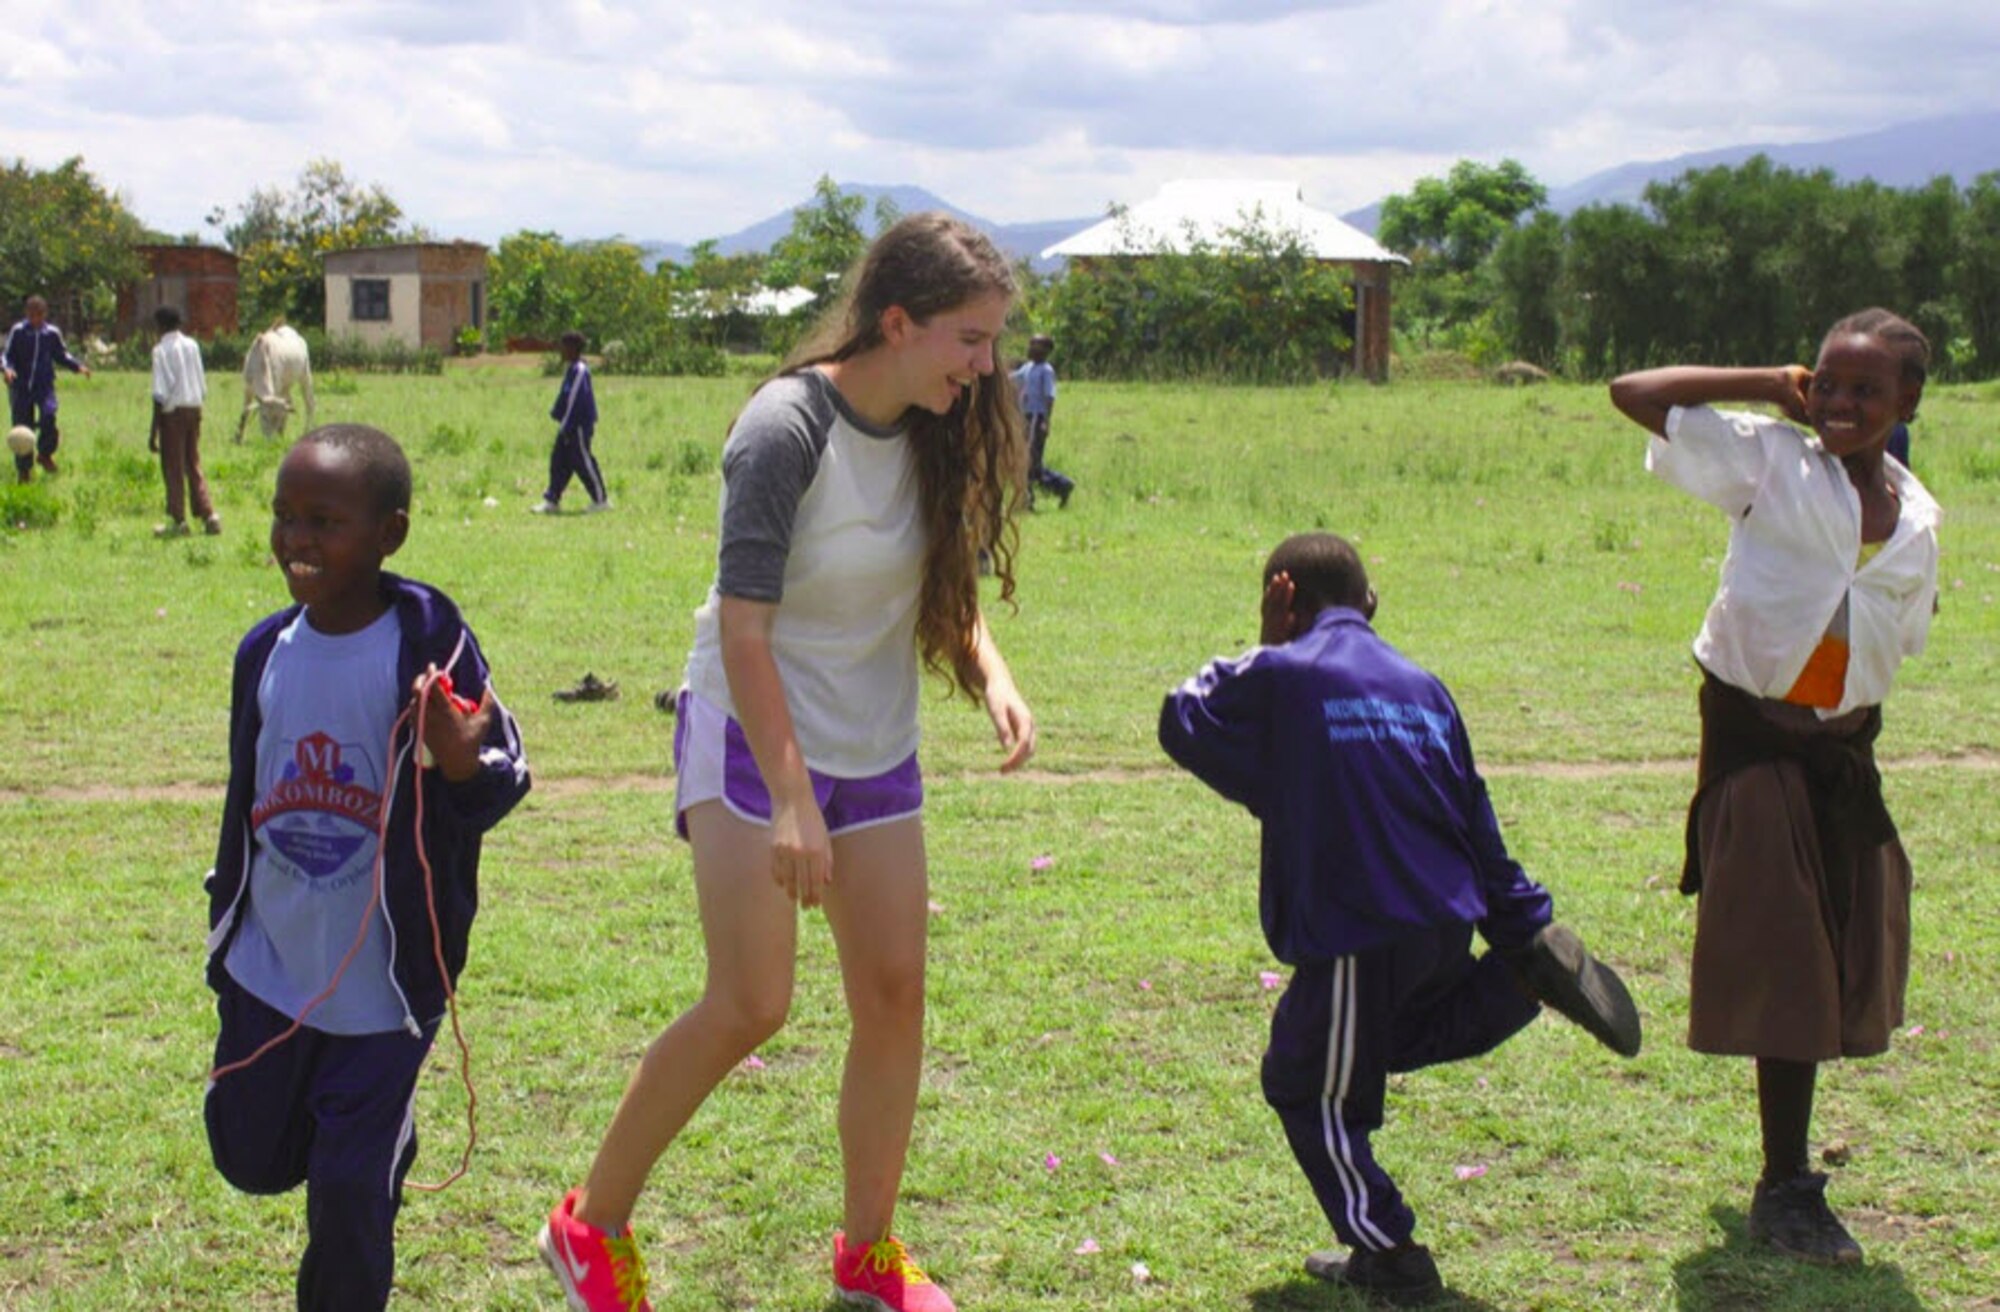 Sarah Hesterman dances with children from Tanzania during her visit to help construct schools for orphaned youth. (Courtesy Photo)